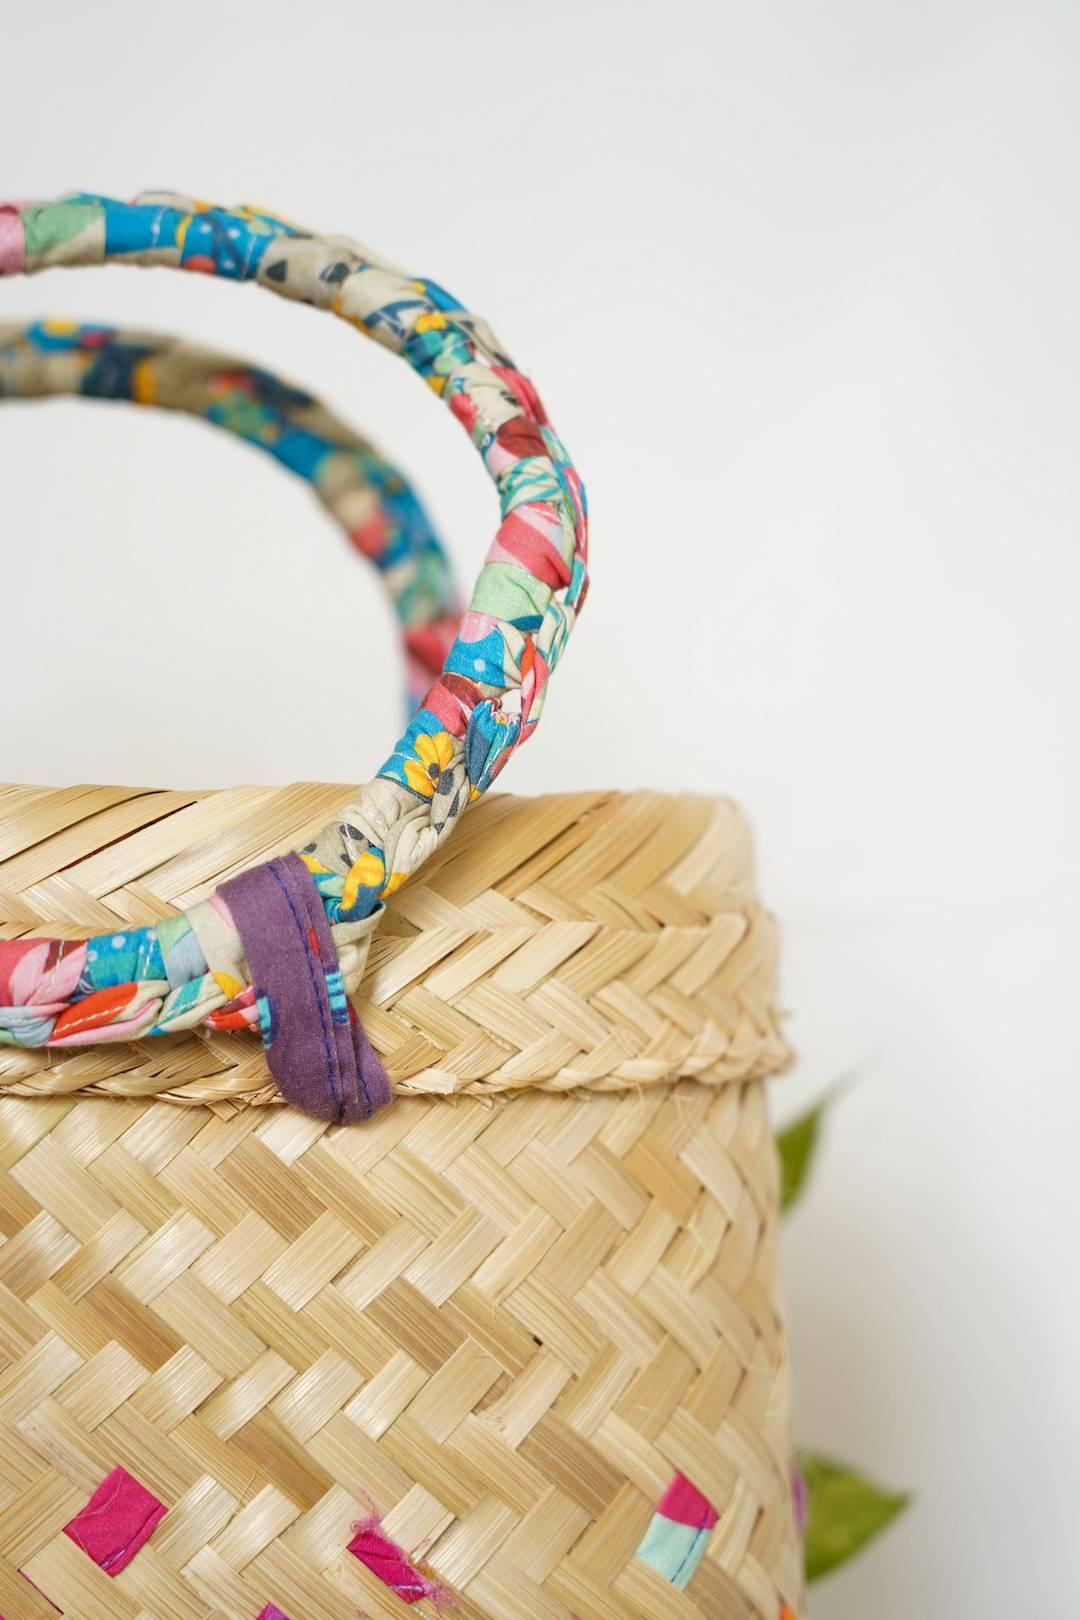 Handwoven Vagator bag made by women artisans using locally sourced bamboo